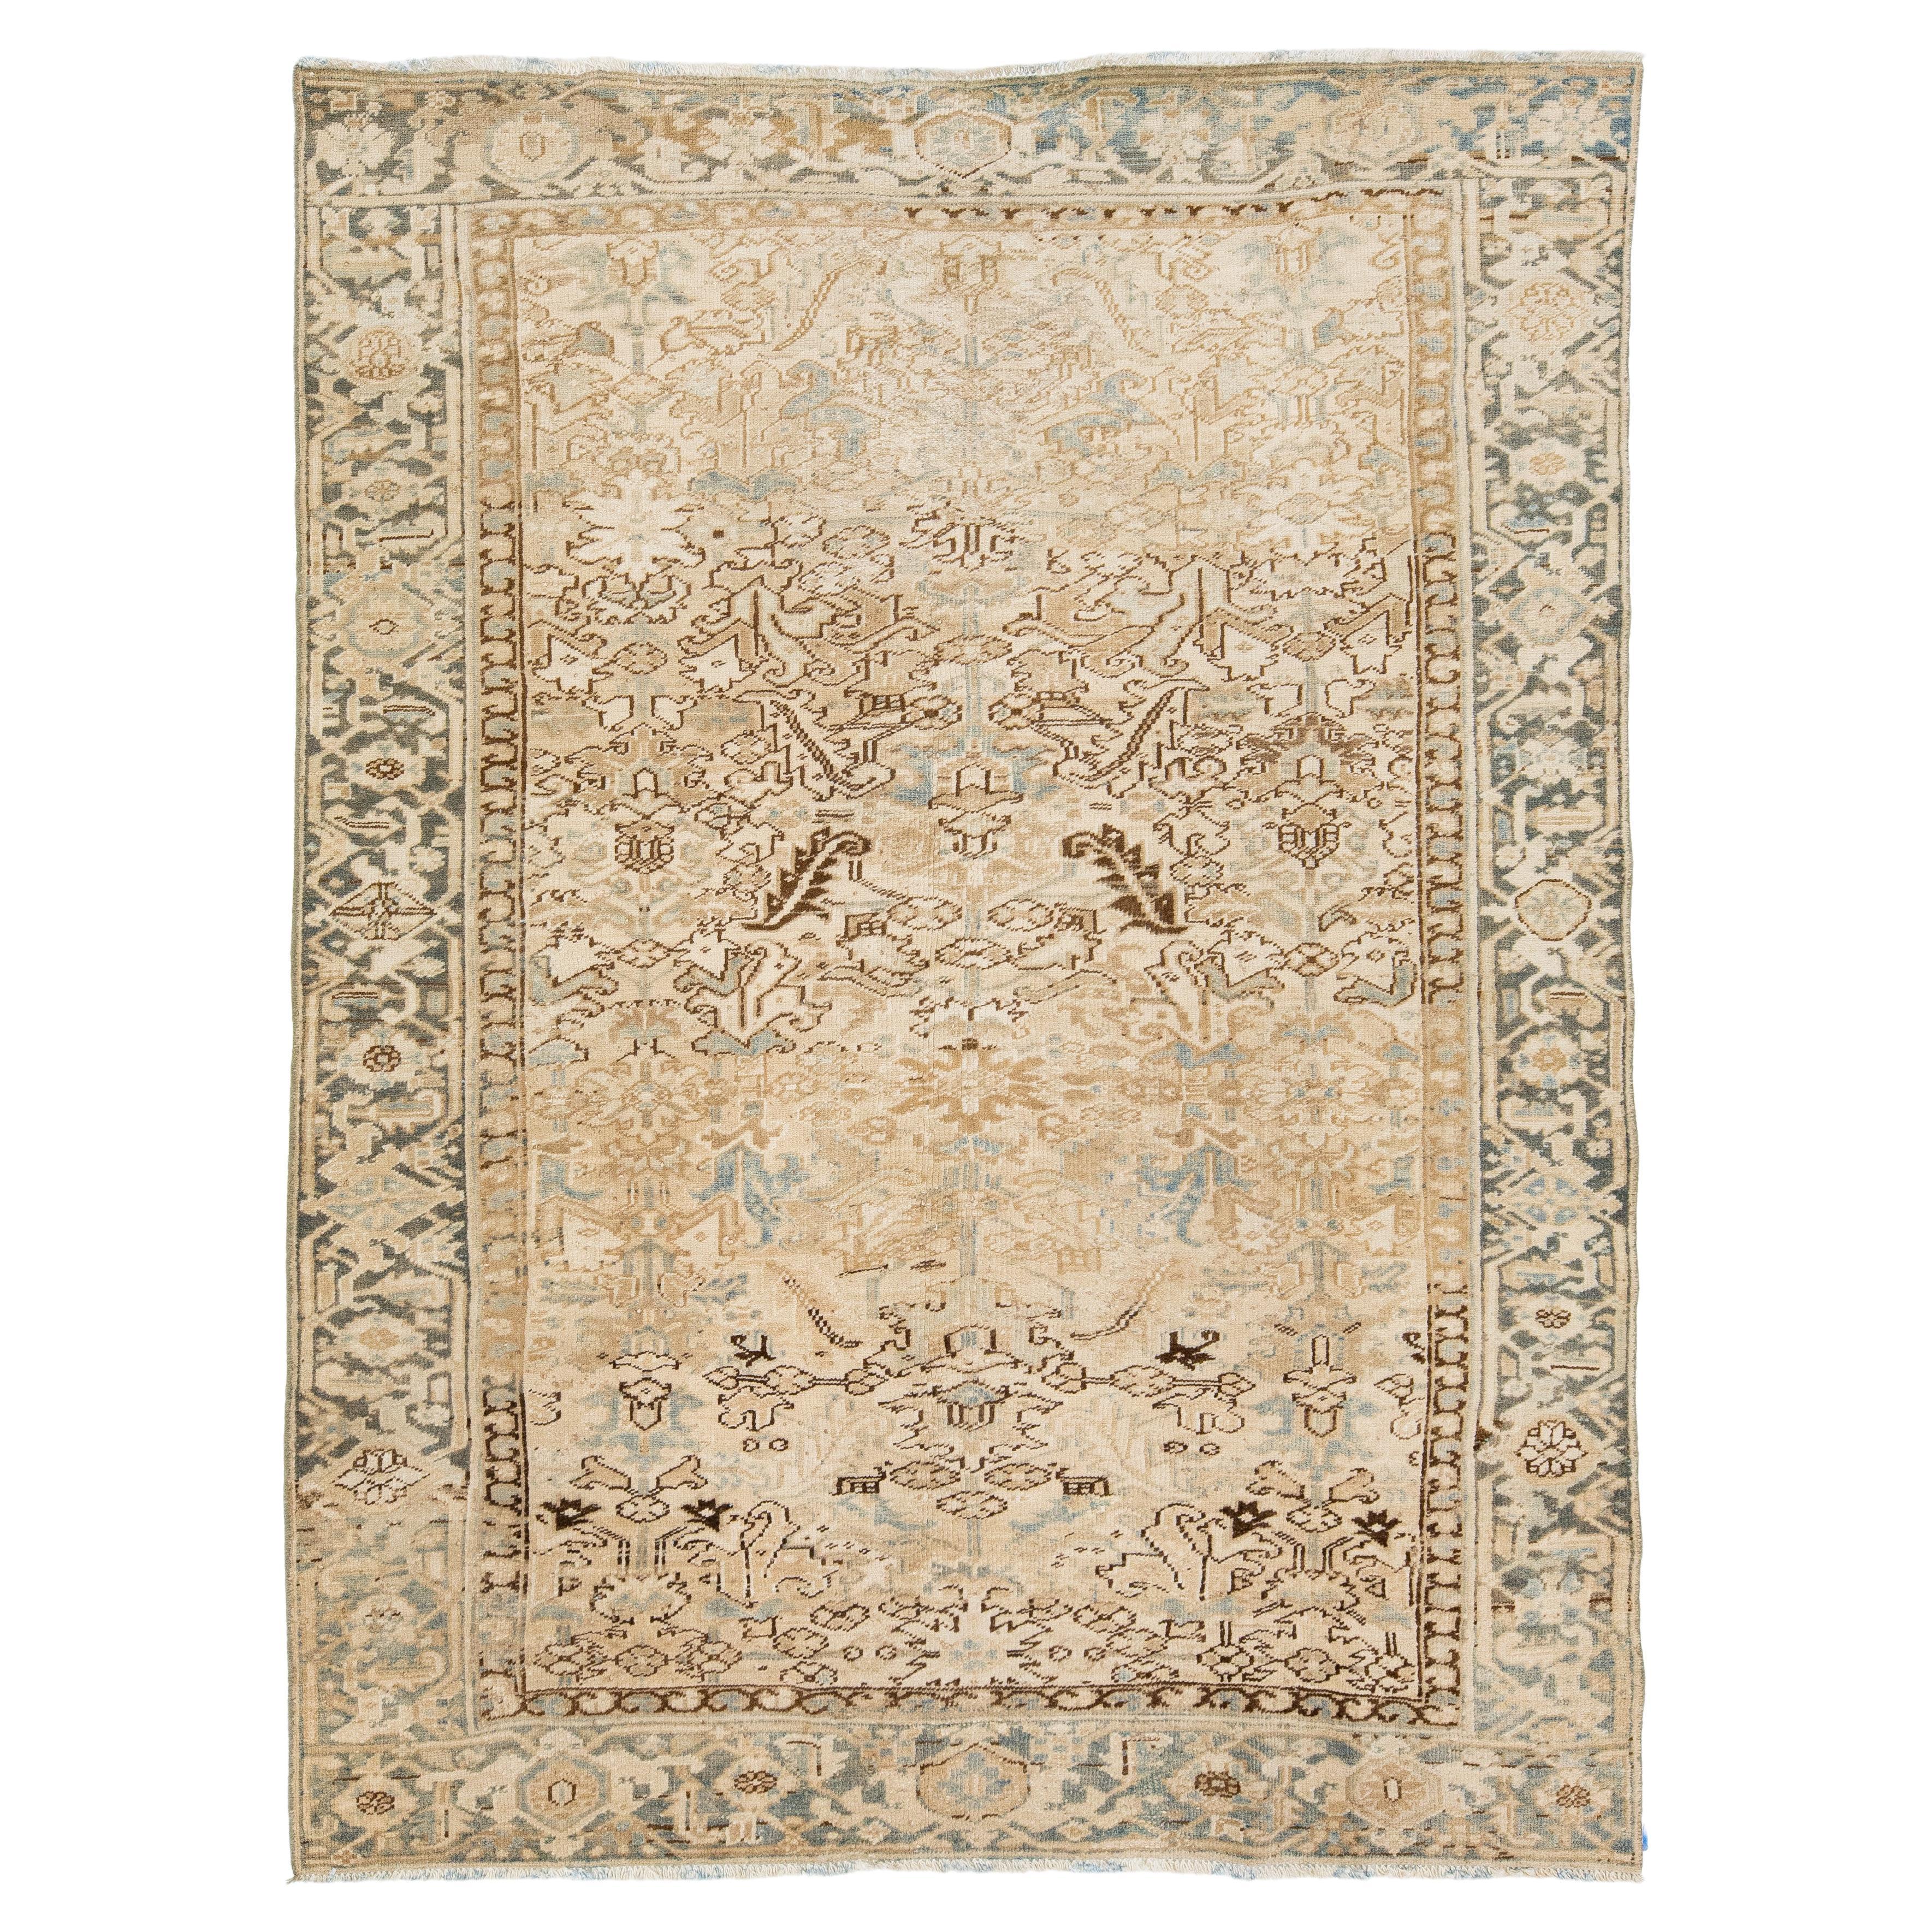 1920s Persian Heriz Room Size Wool Rug In Beige with Allover Motif  For Sale